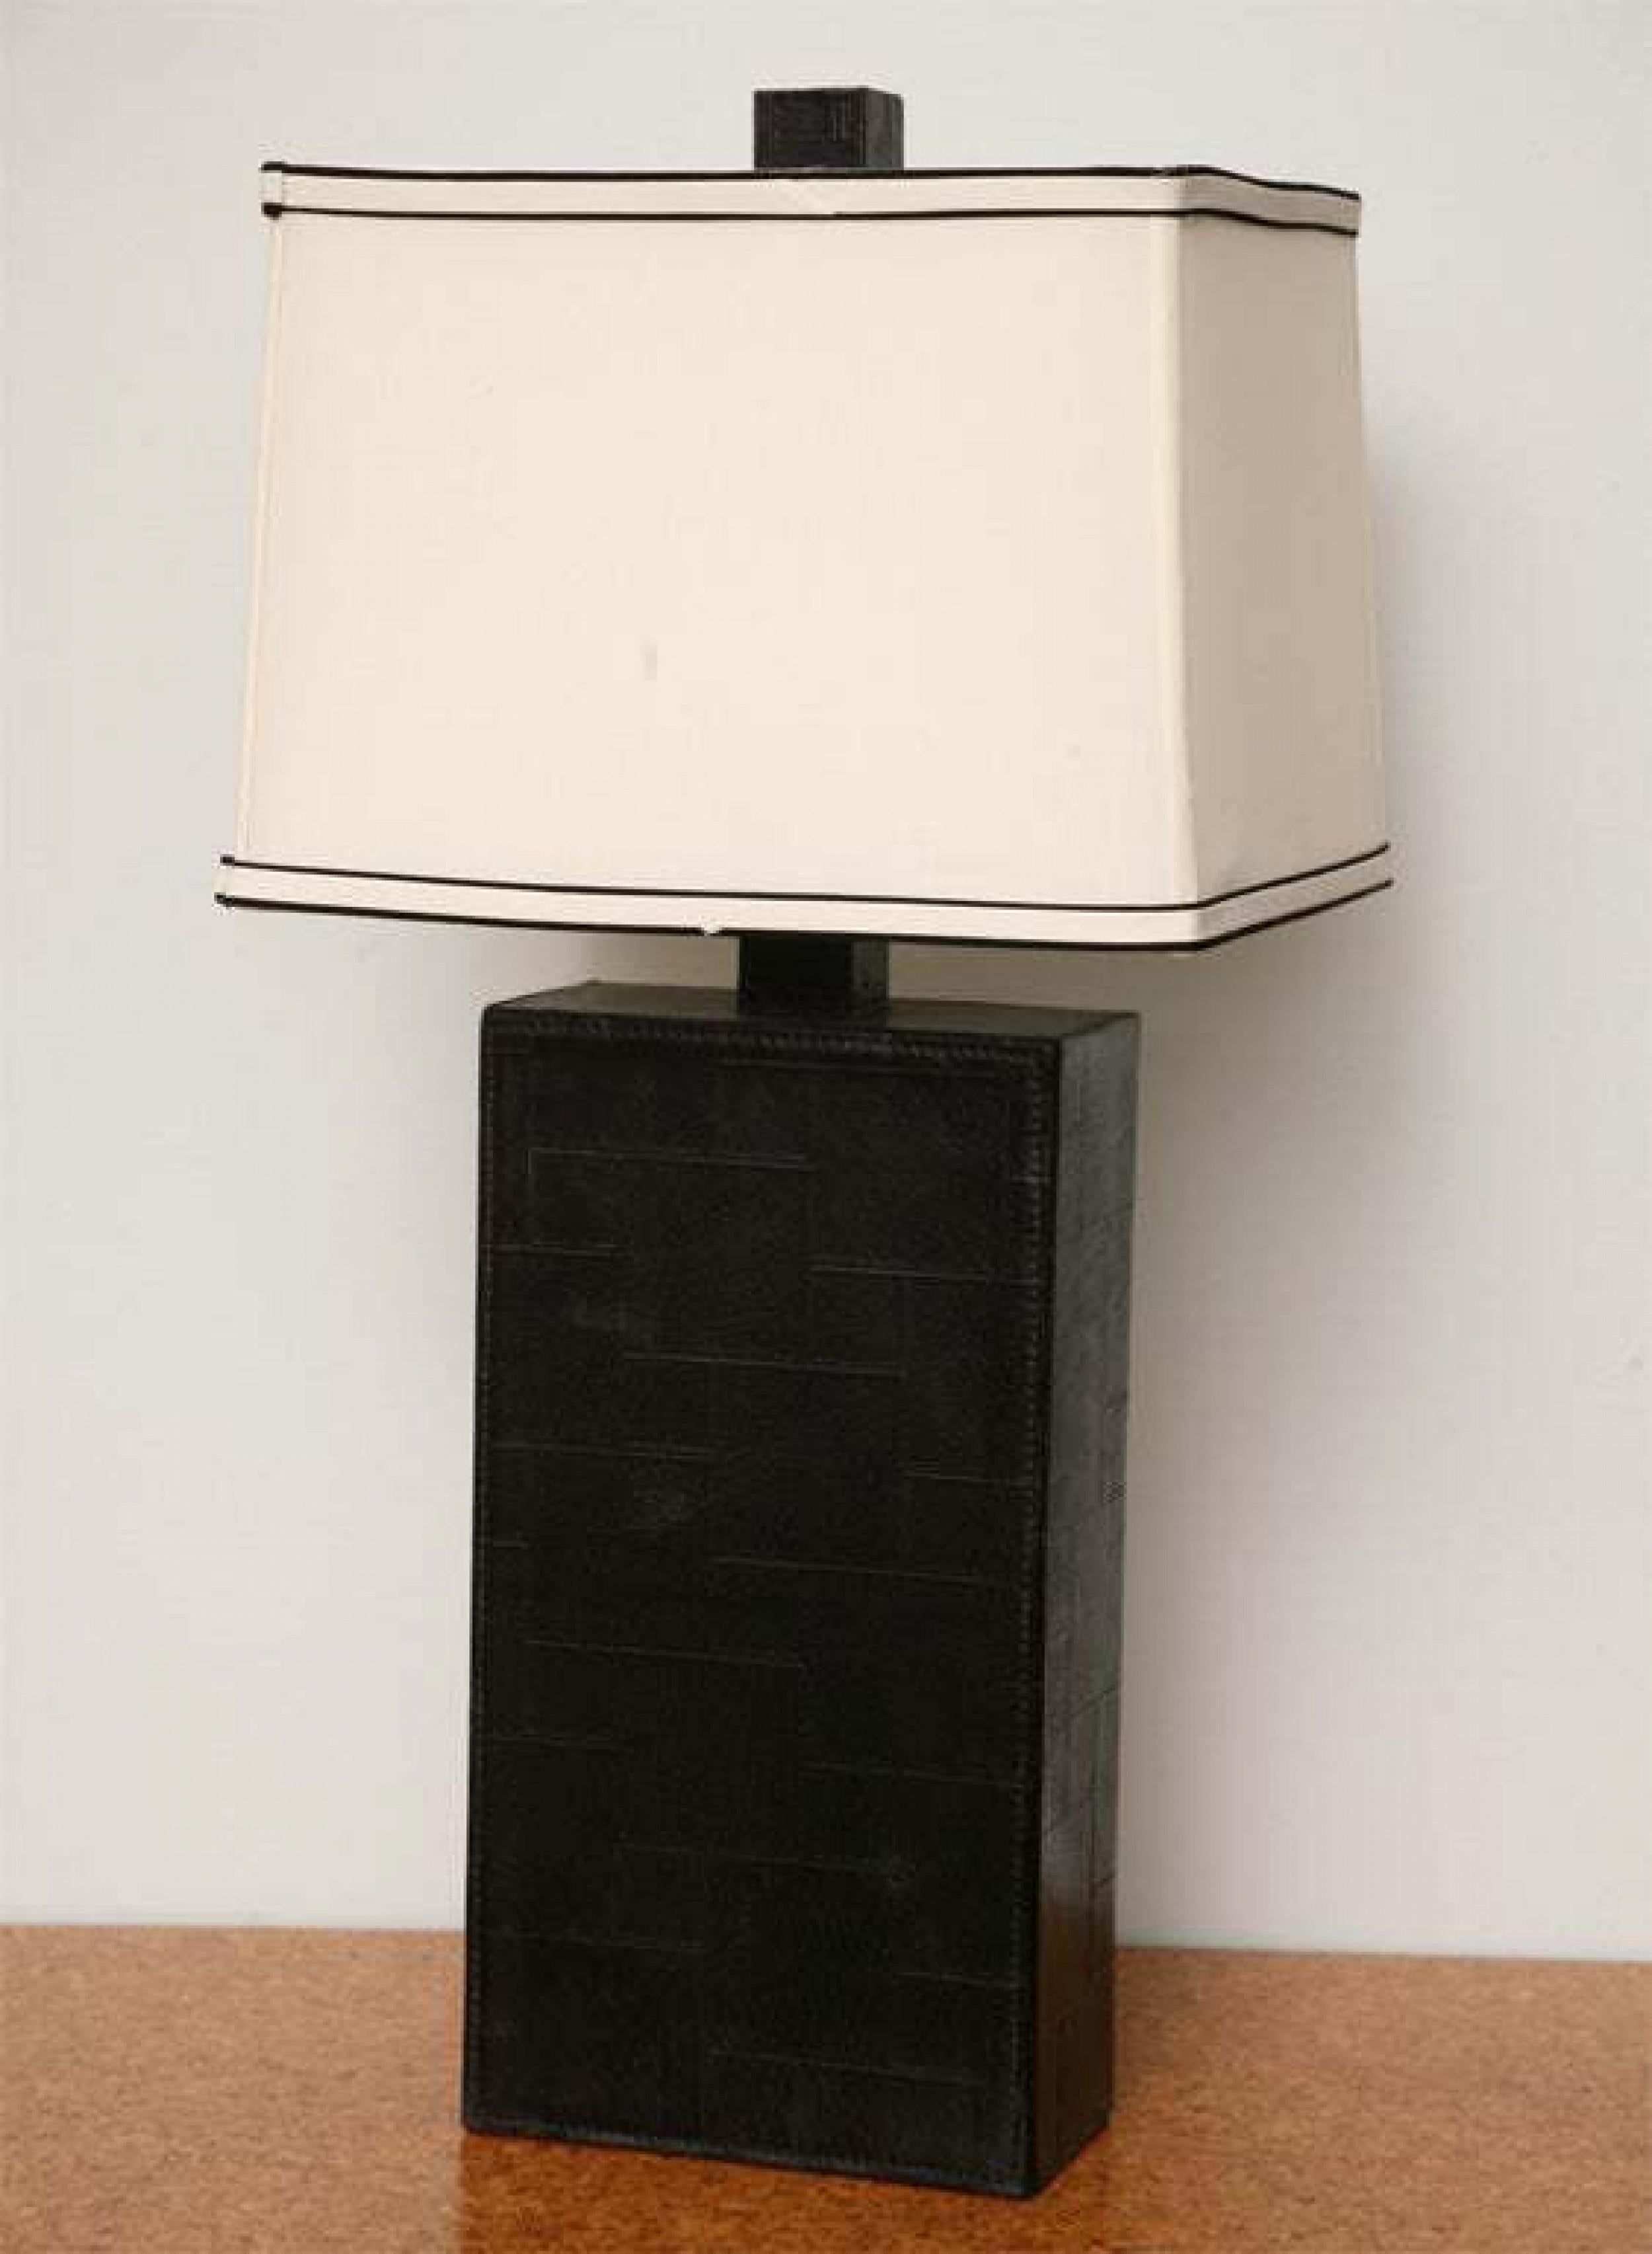 PAIR of midcentury American black leather table lamps (in the Style of Jacques Adnet) (PRICED AS PAIR).